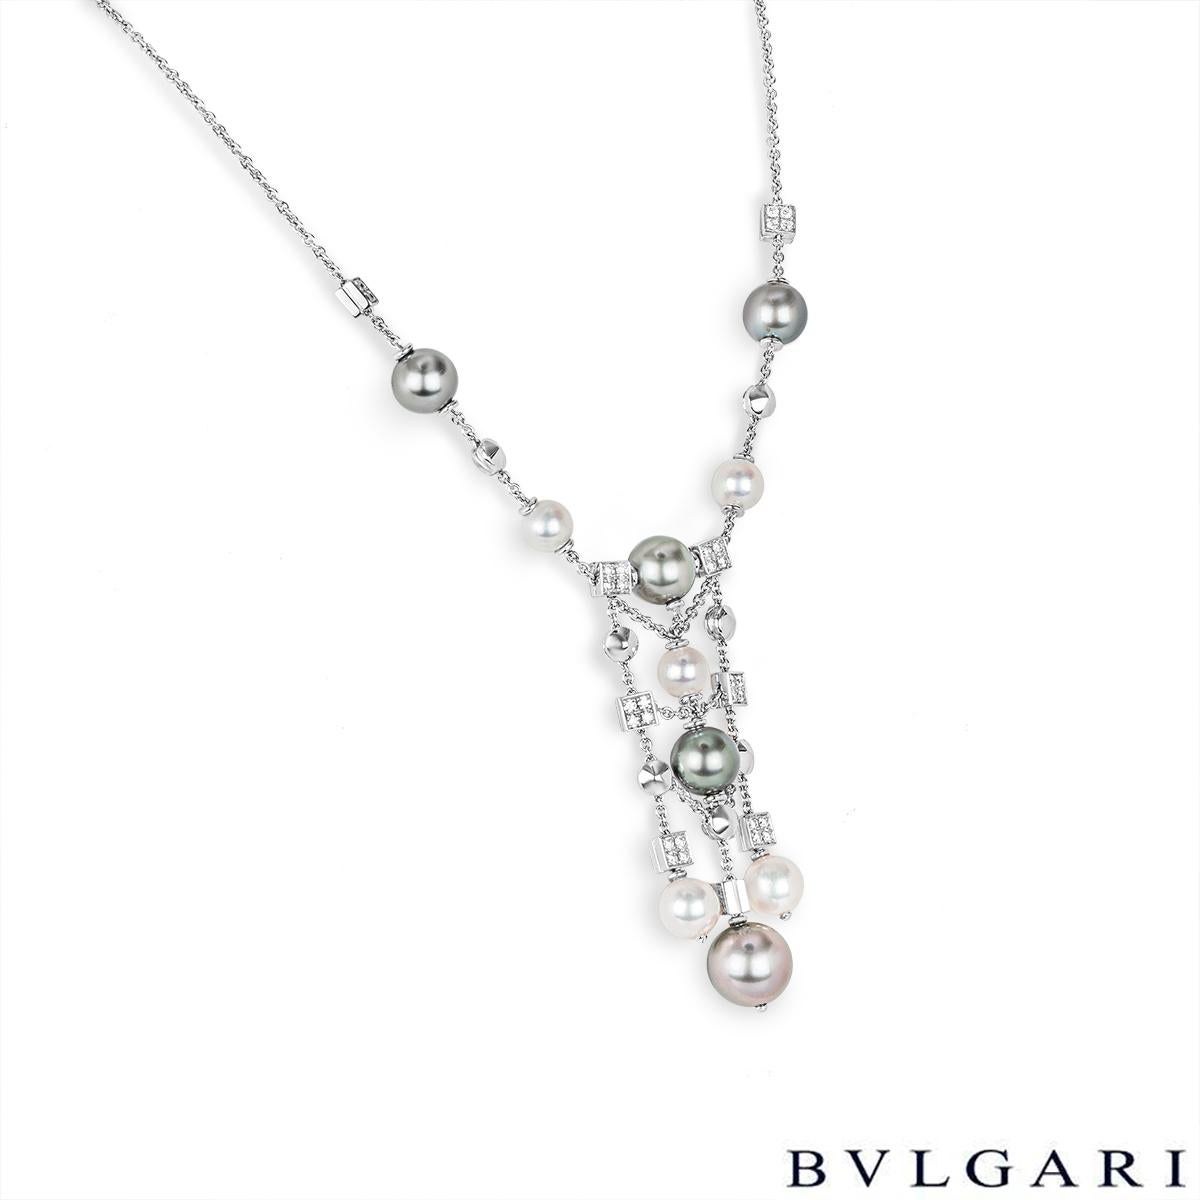 A sophisticated 18k white gold pearl and diamond necklace by Bvlgari from the Lucea collection. The necklace, which has a three-row drop, is set with 6 round dark grey pearls ranging from 9mm-11.8mm displaying a green or purple overtone and 6 round